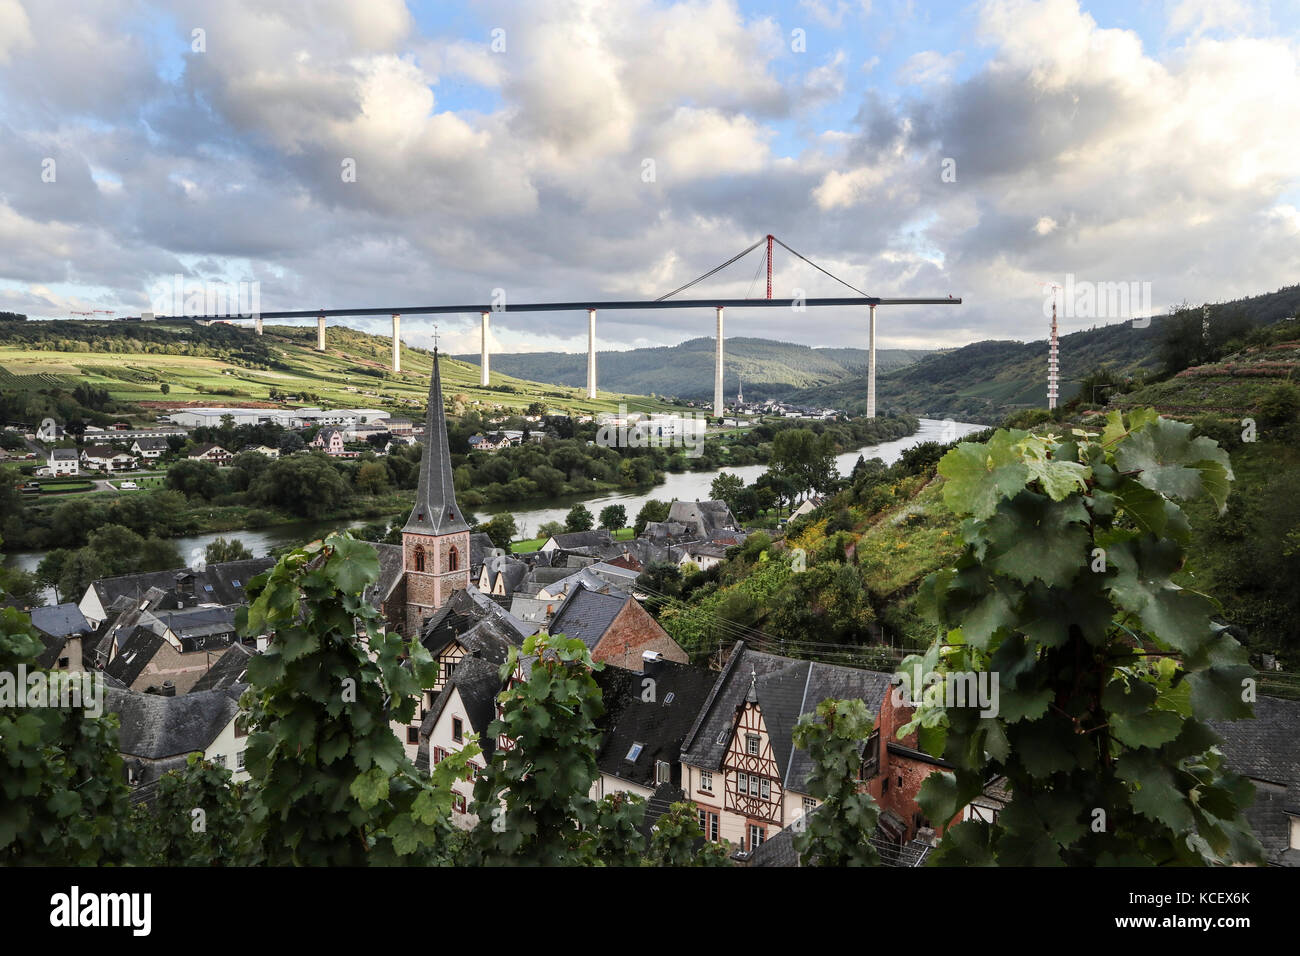 The town of Urzig, in the Mosel Valley, Germany, with the unfinished Autobahn bridge crossing the valley in the distance Stock Photo